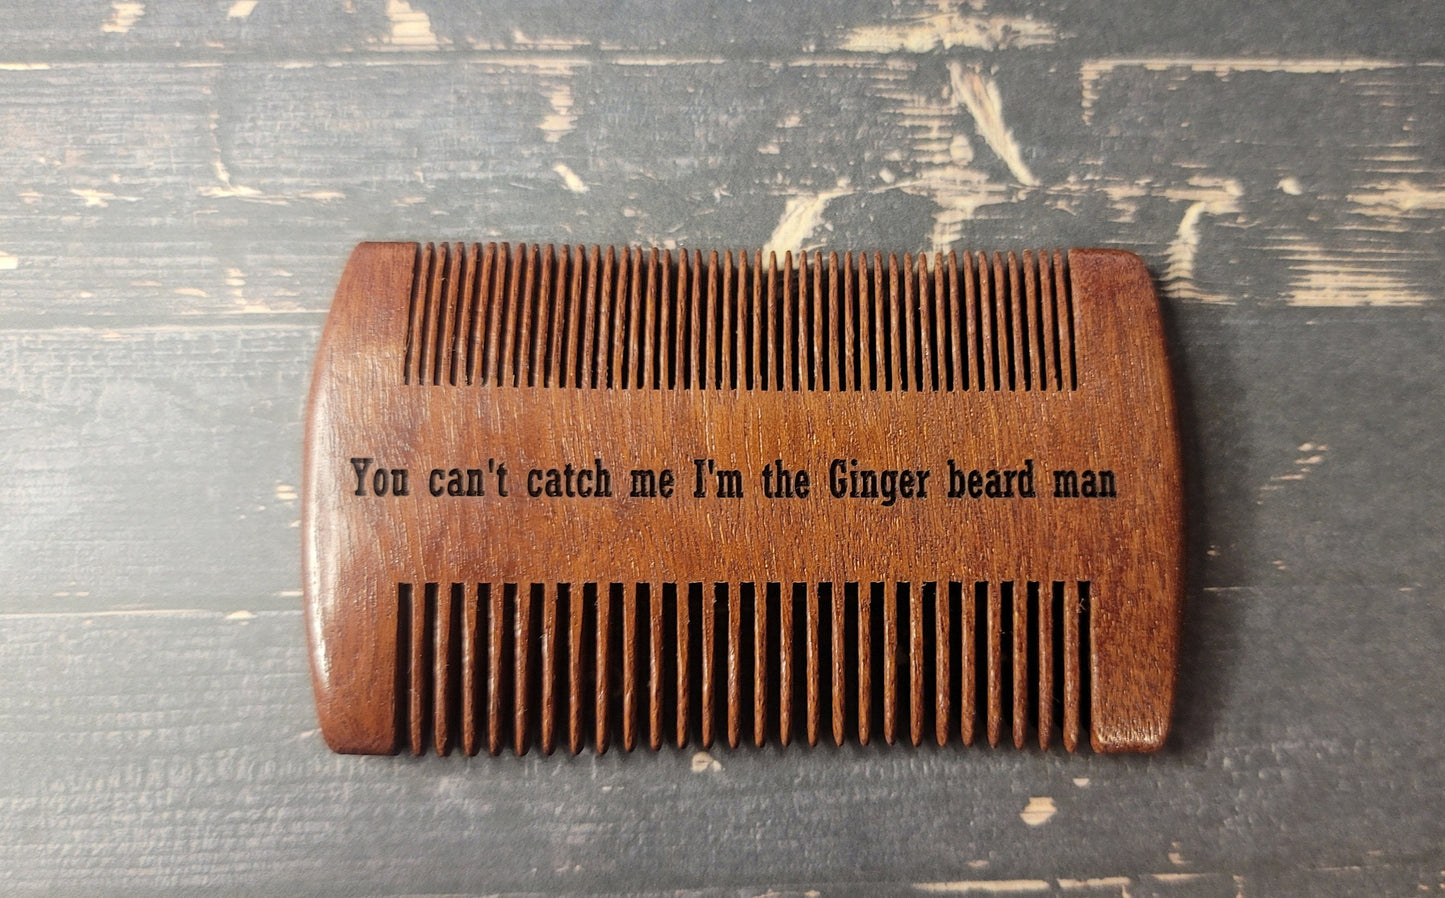 You can't catch me I'm the Ginger beard man - Beard Comb